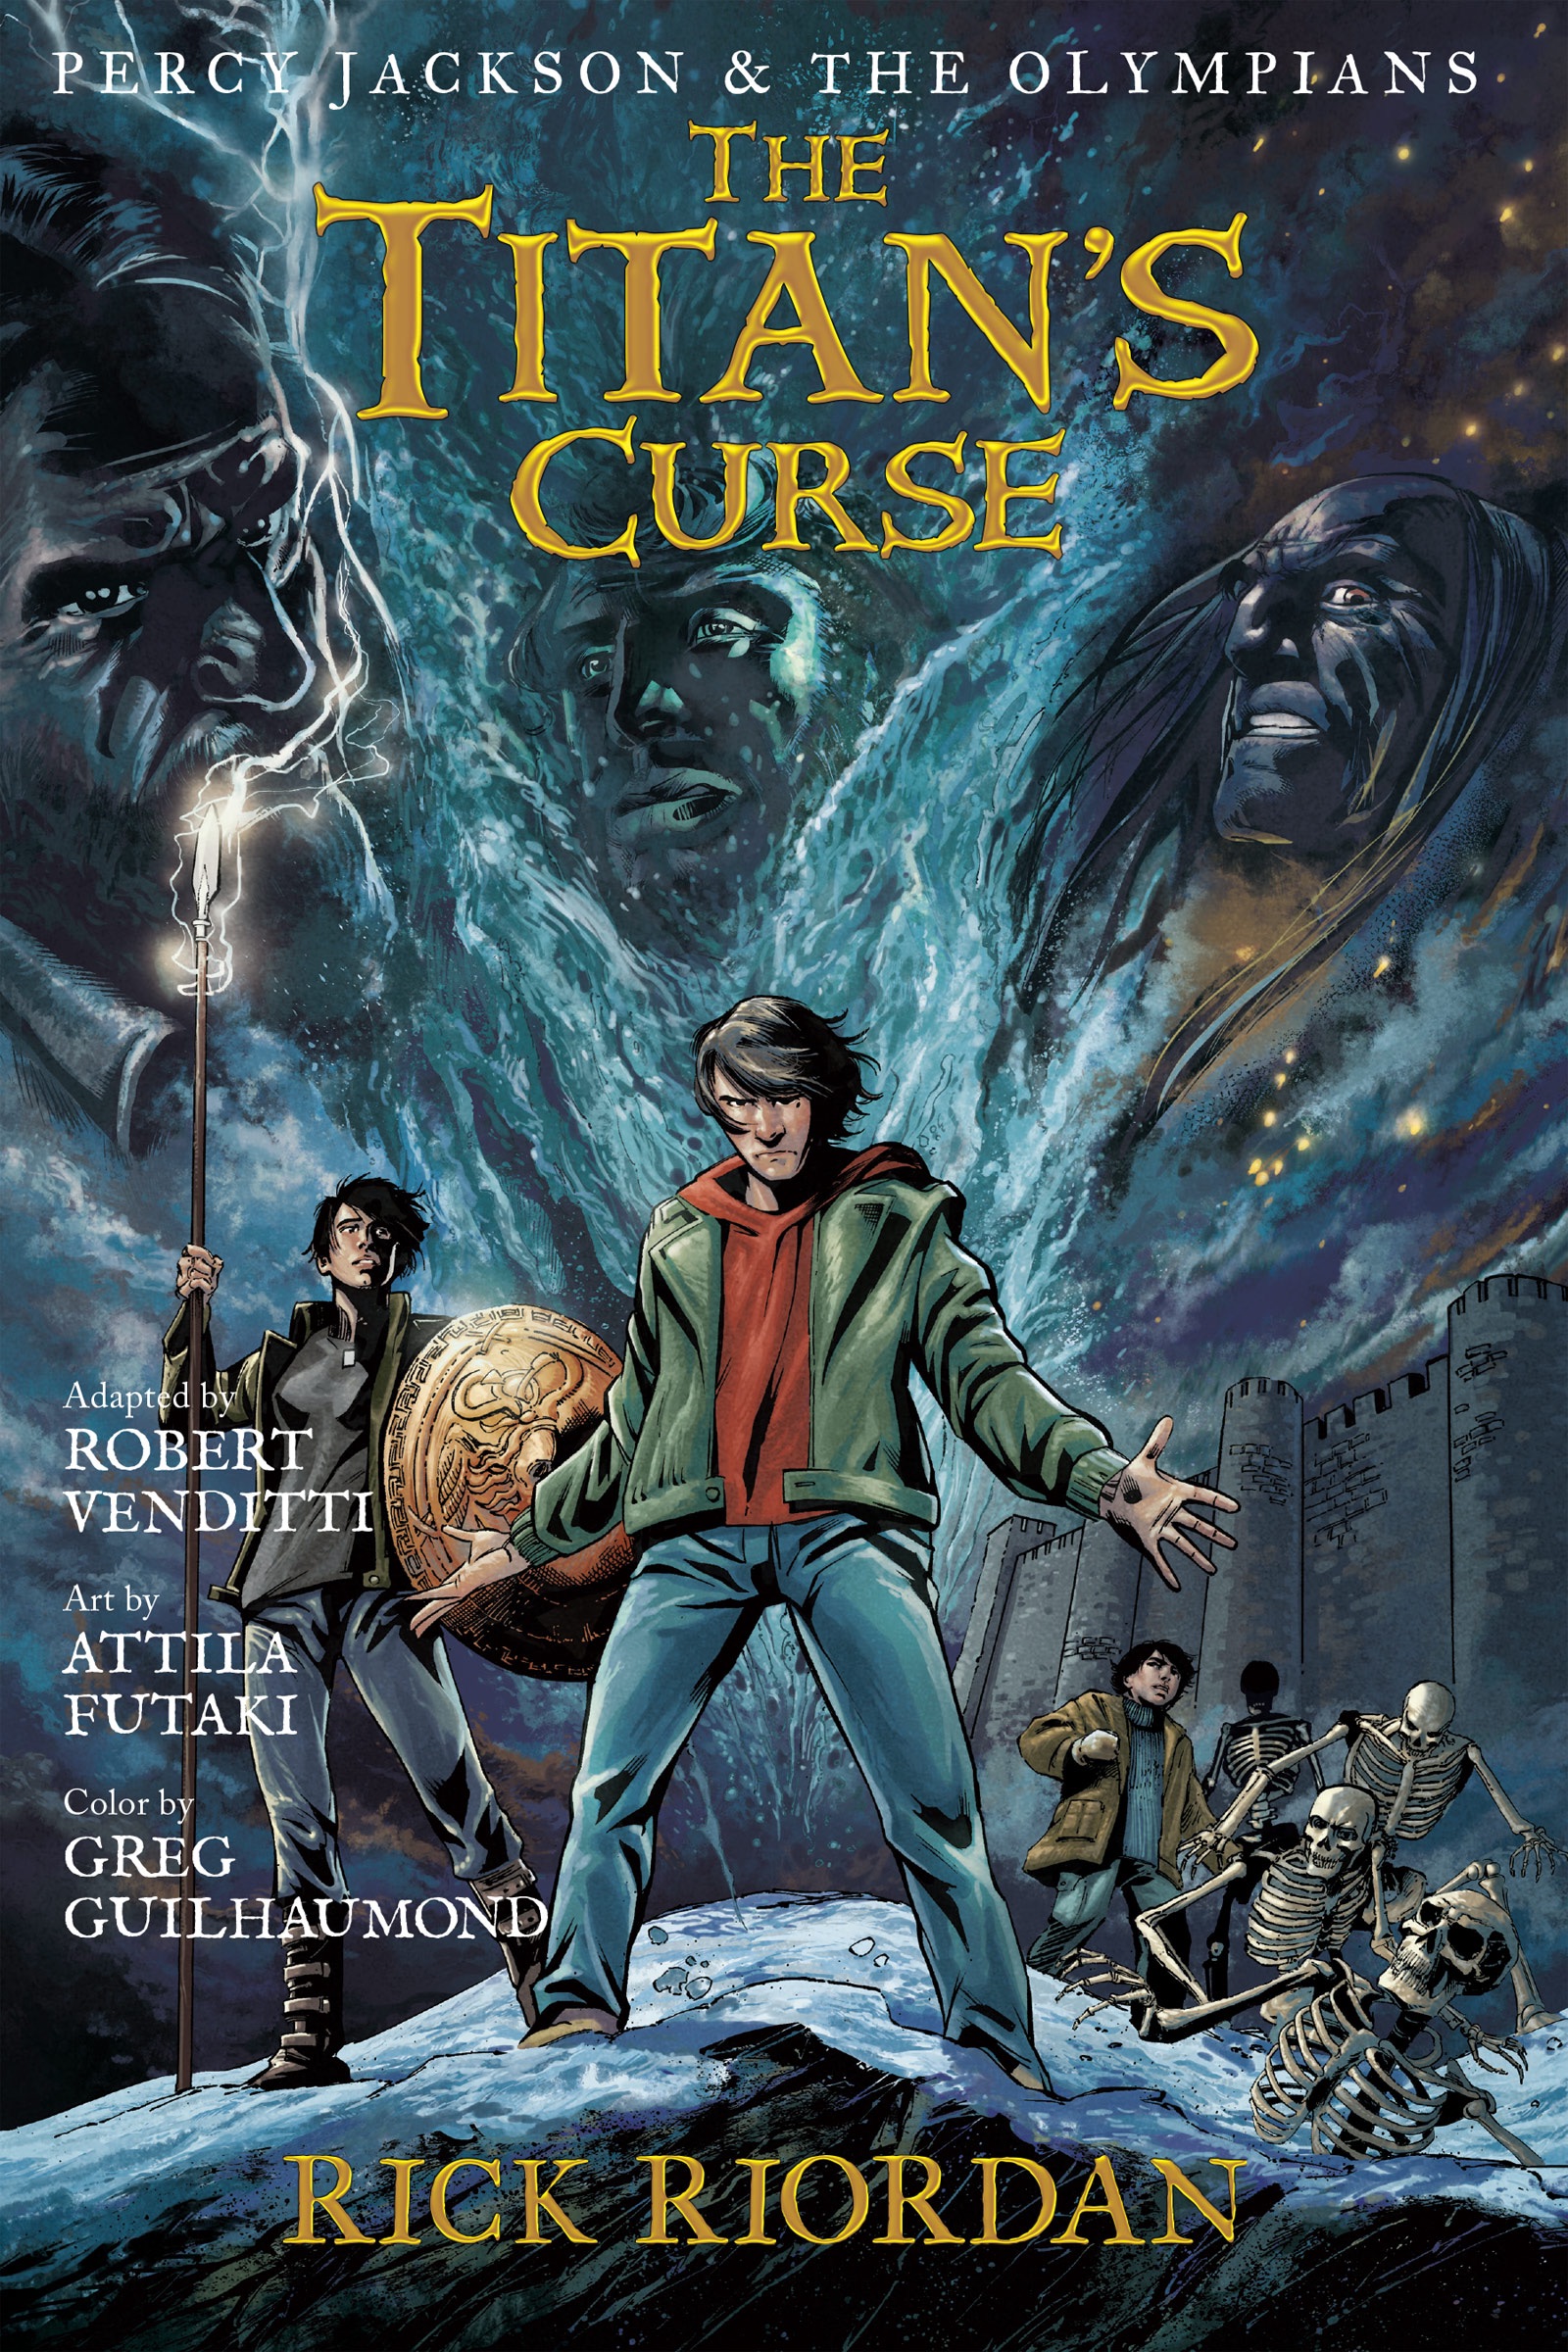 read percy jackson graphic novel online free